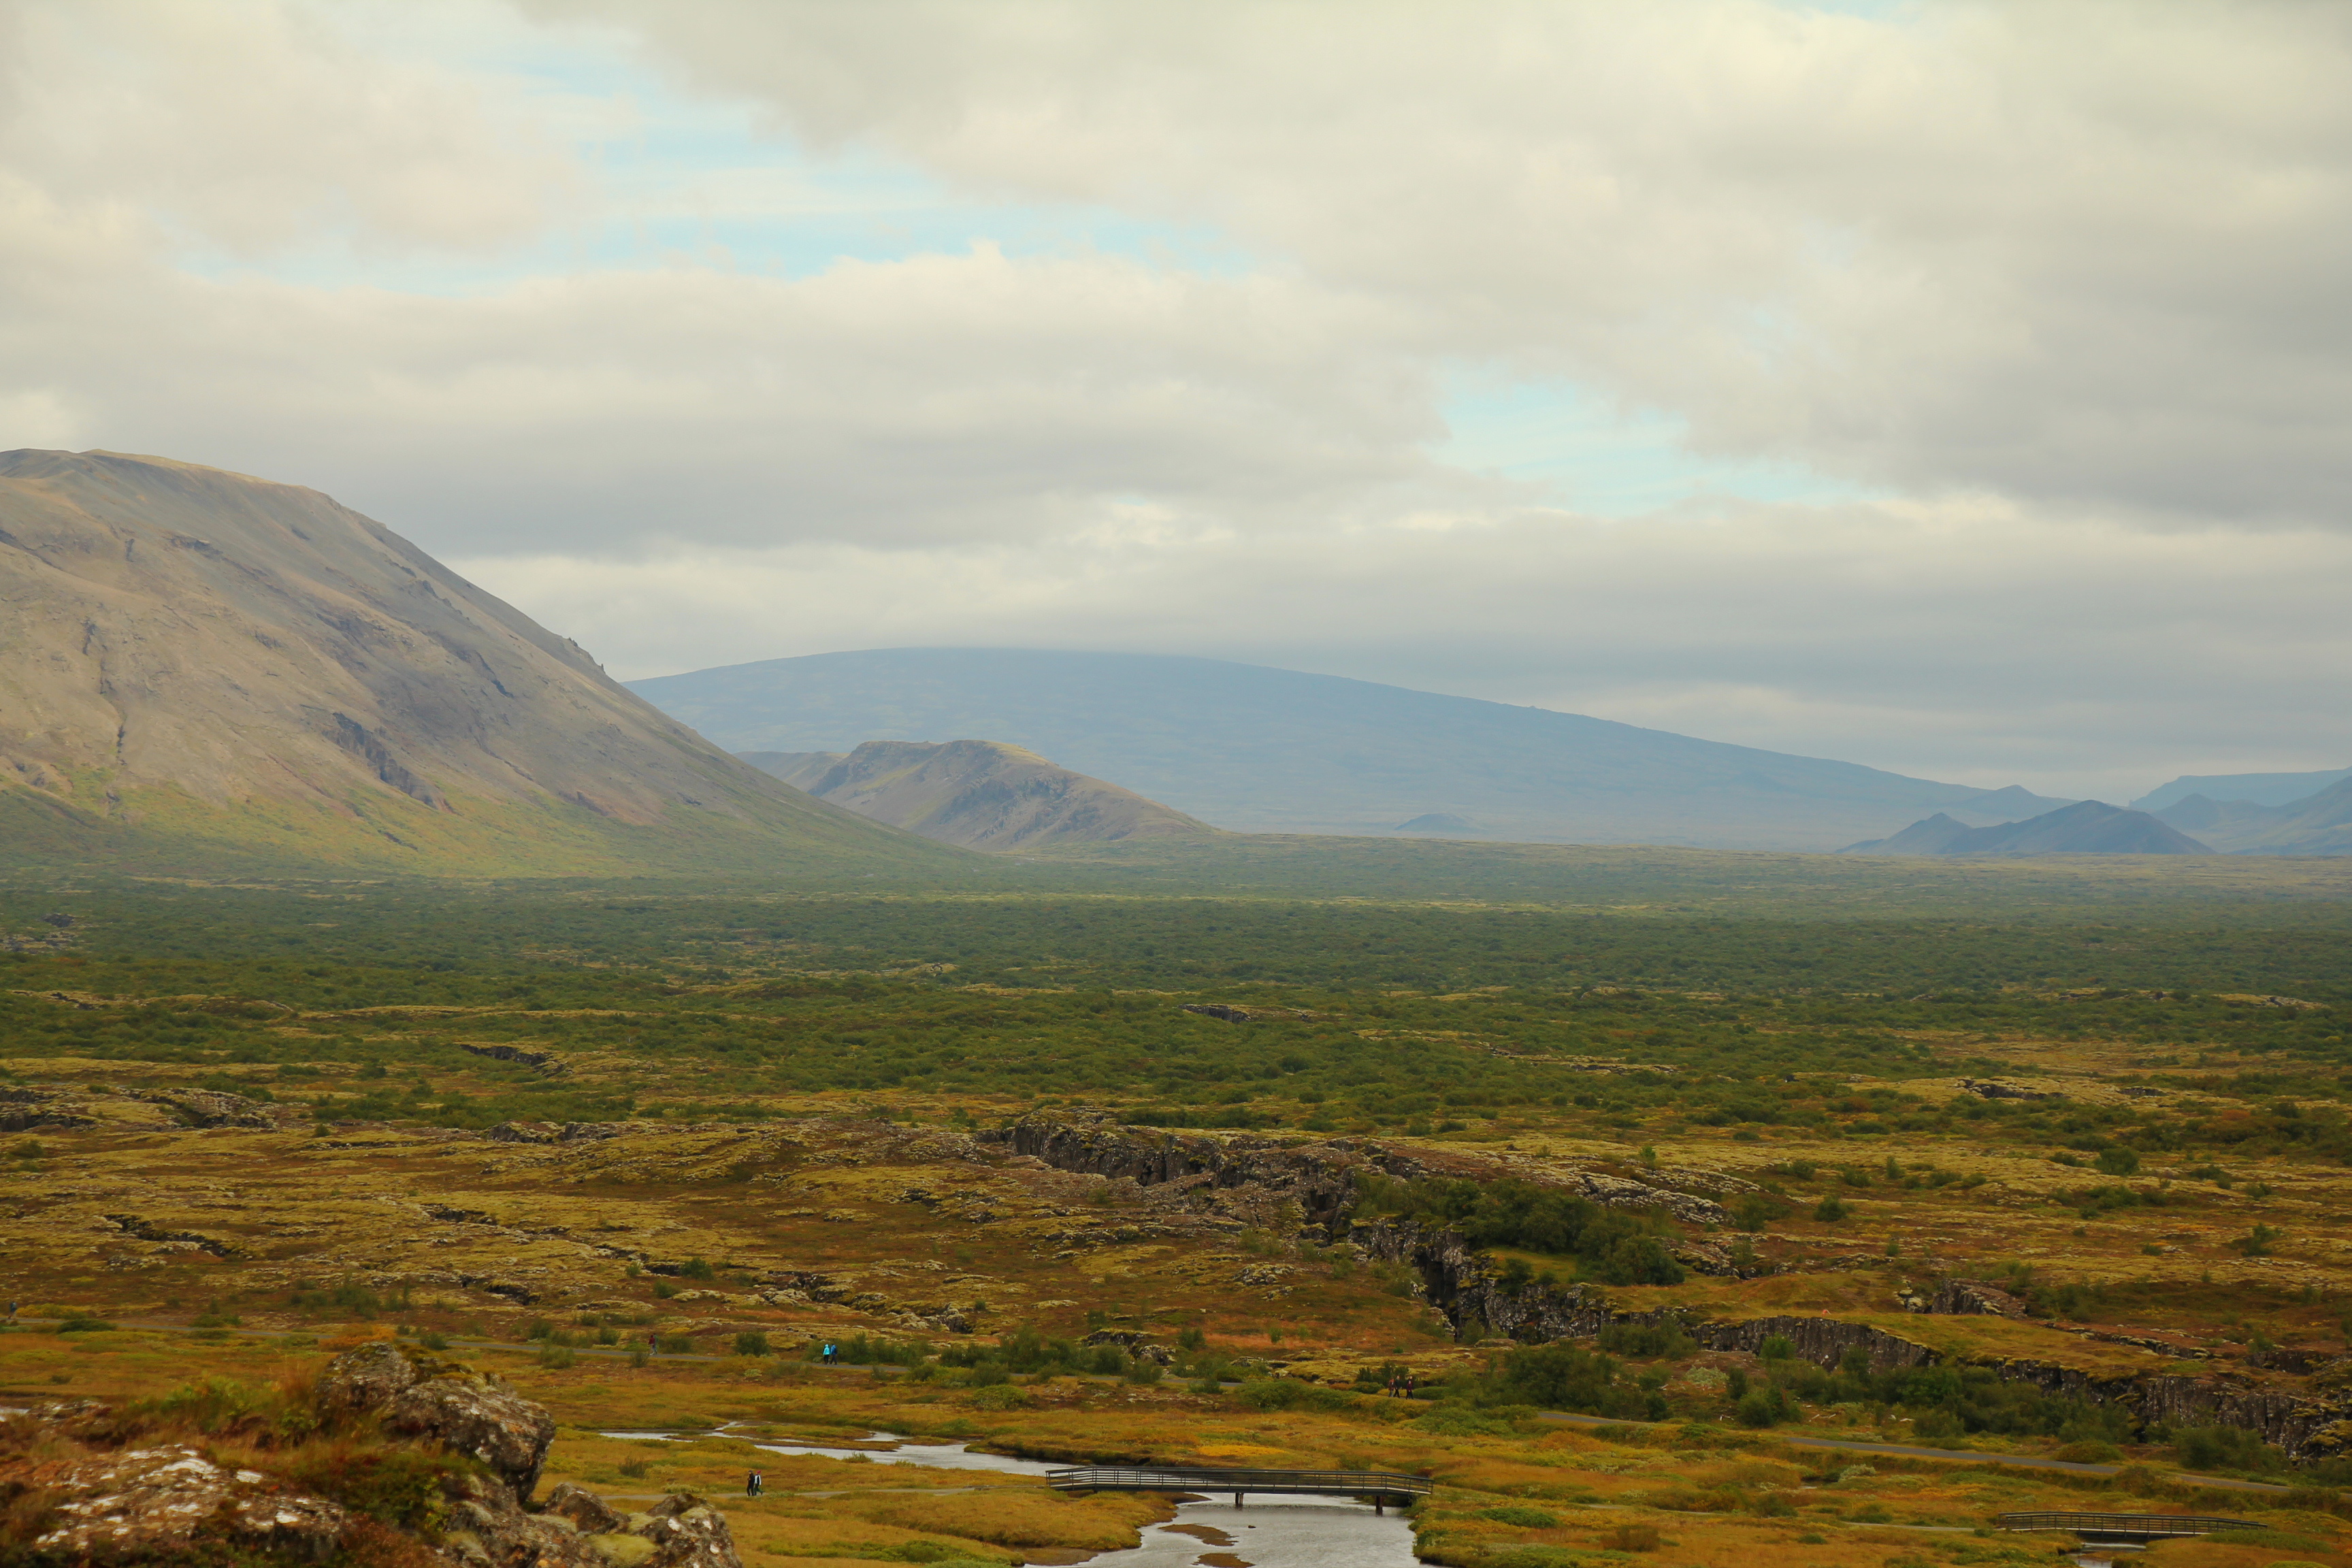 Looking out over the mid-Atlantic Ridge towards the European plate at Þingvellir, Iceland. Photo by author.